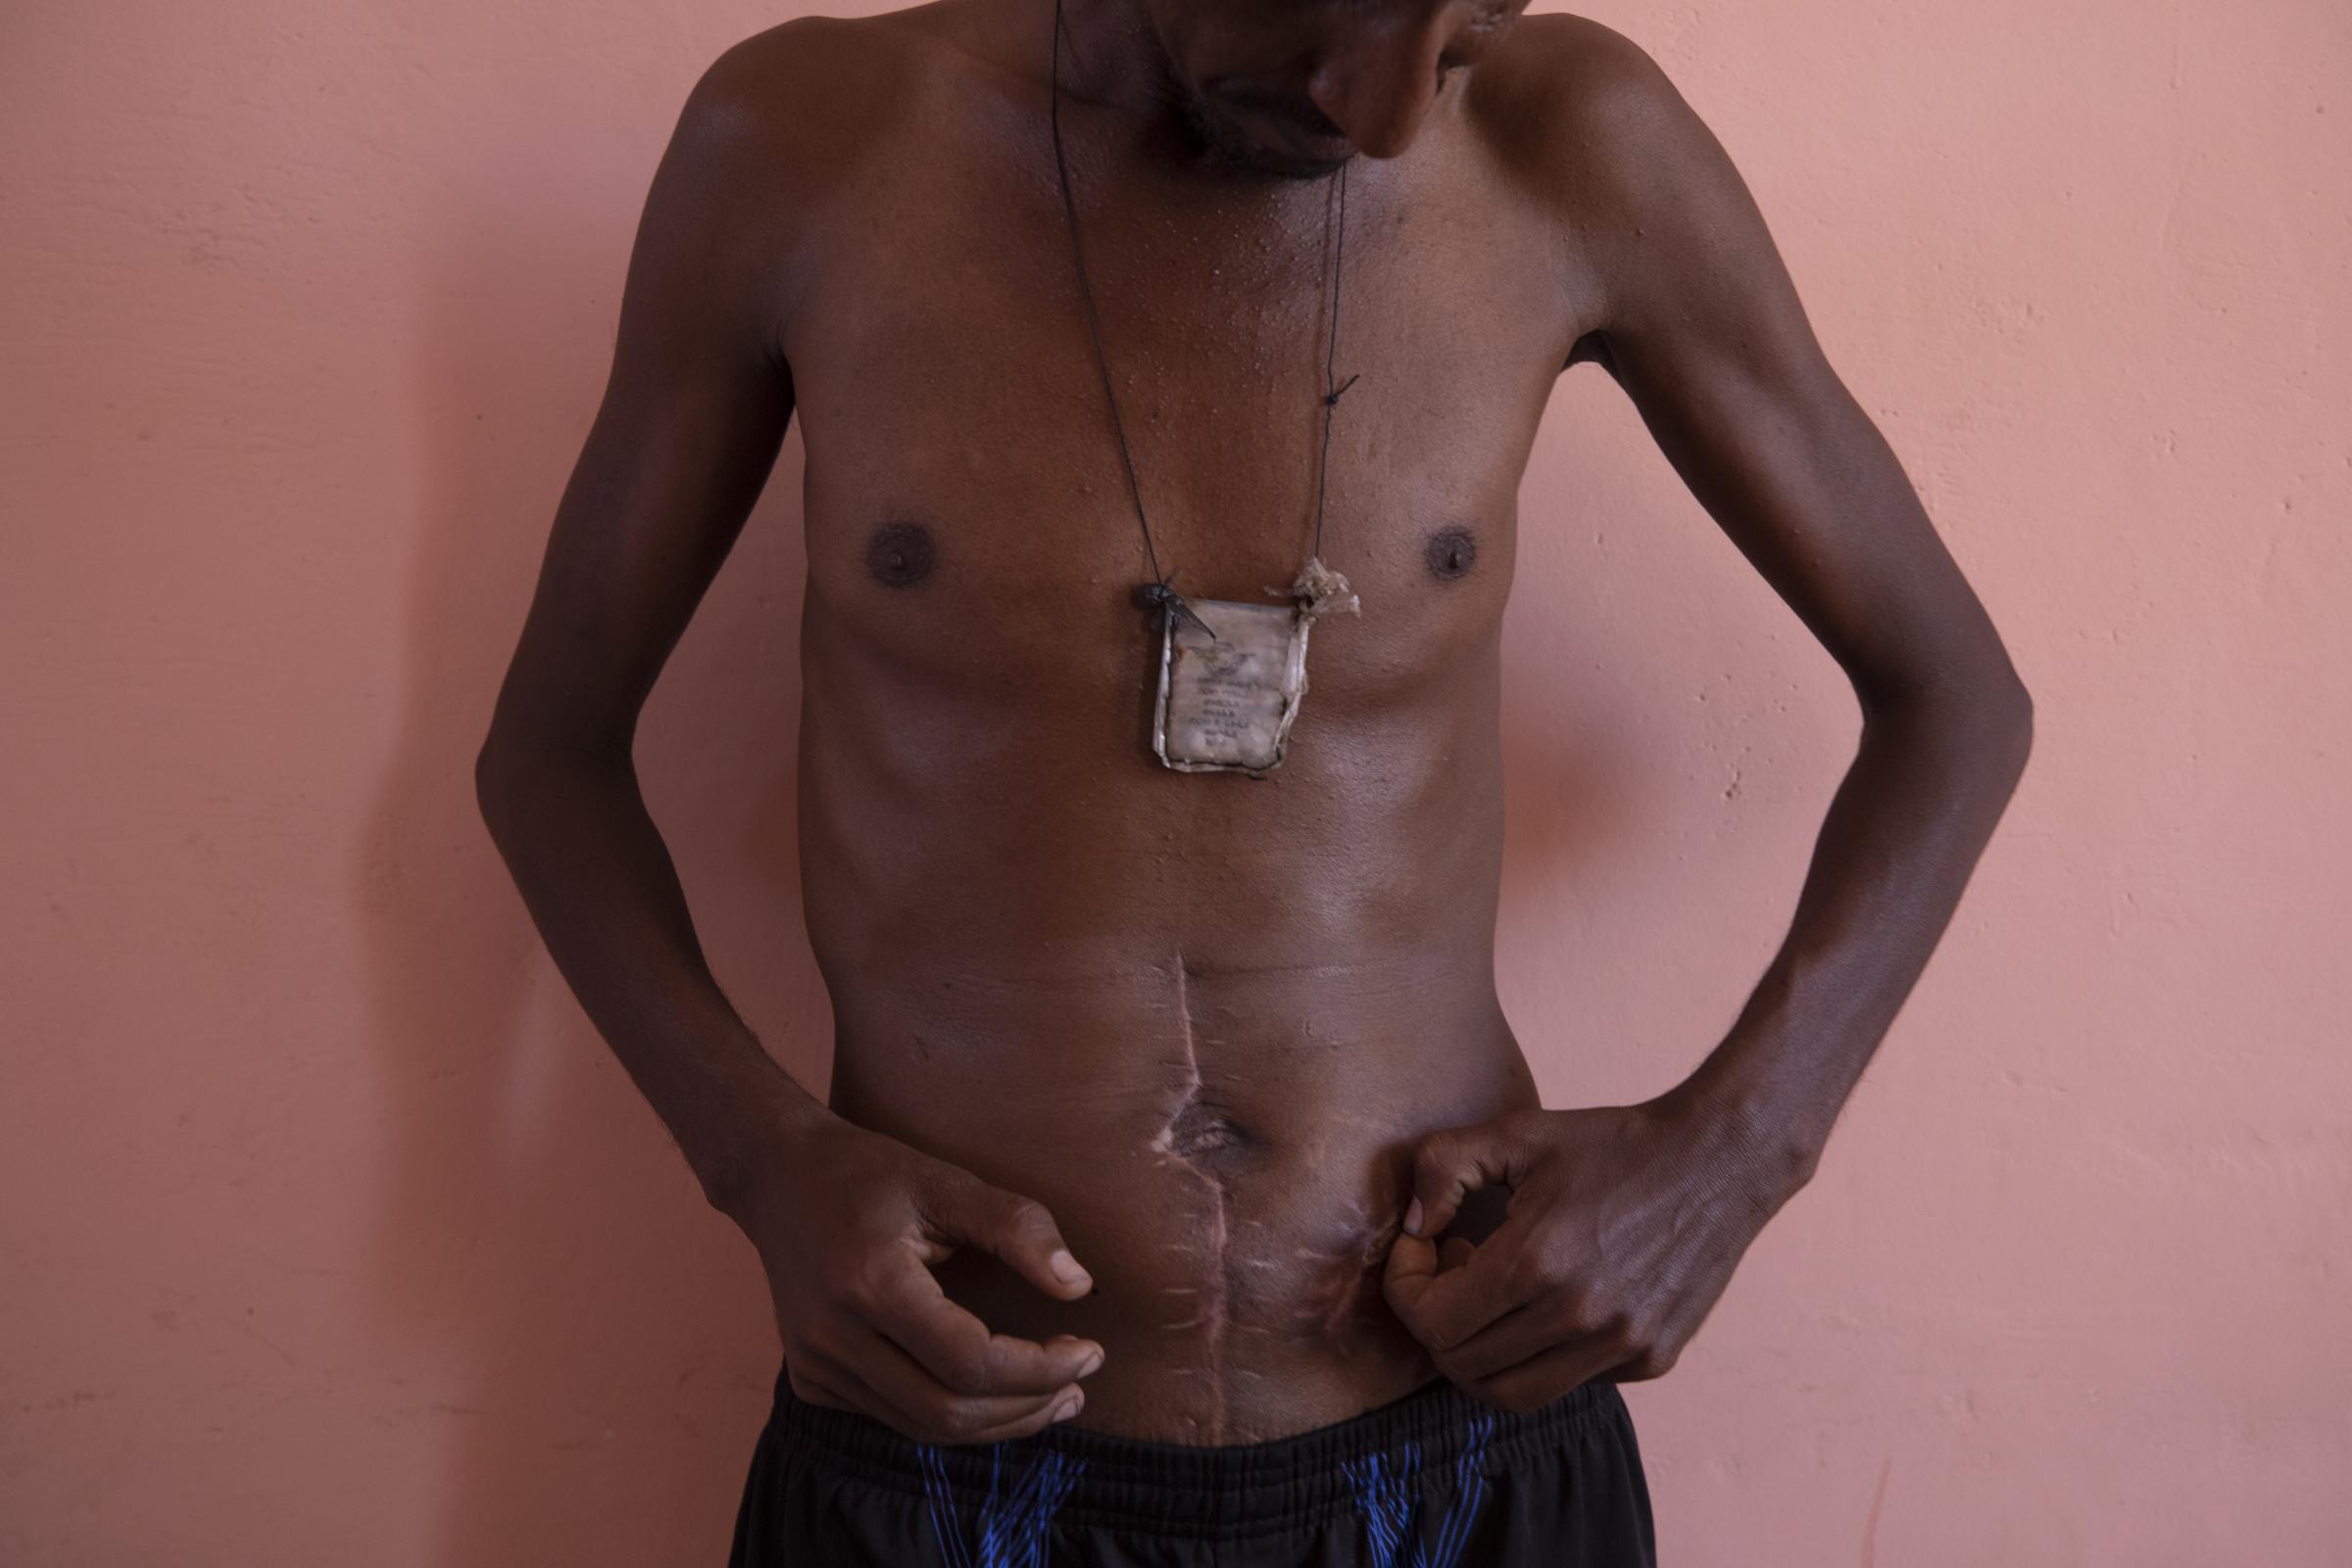 Nega Chekole, 30, from Humera, touches his stitched wound. He says he remembers being shot by militias before the war broke out on Nov. 4. The atrocities have been seared into his skin.